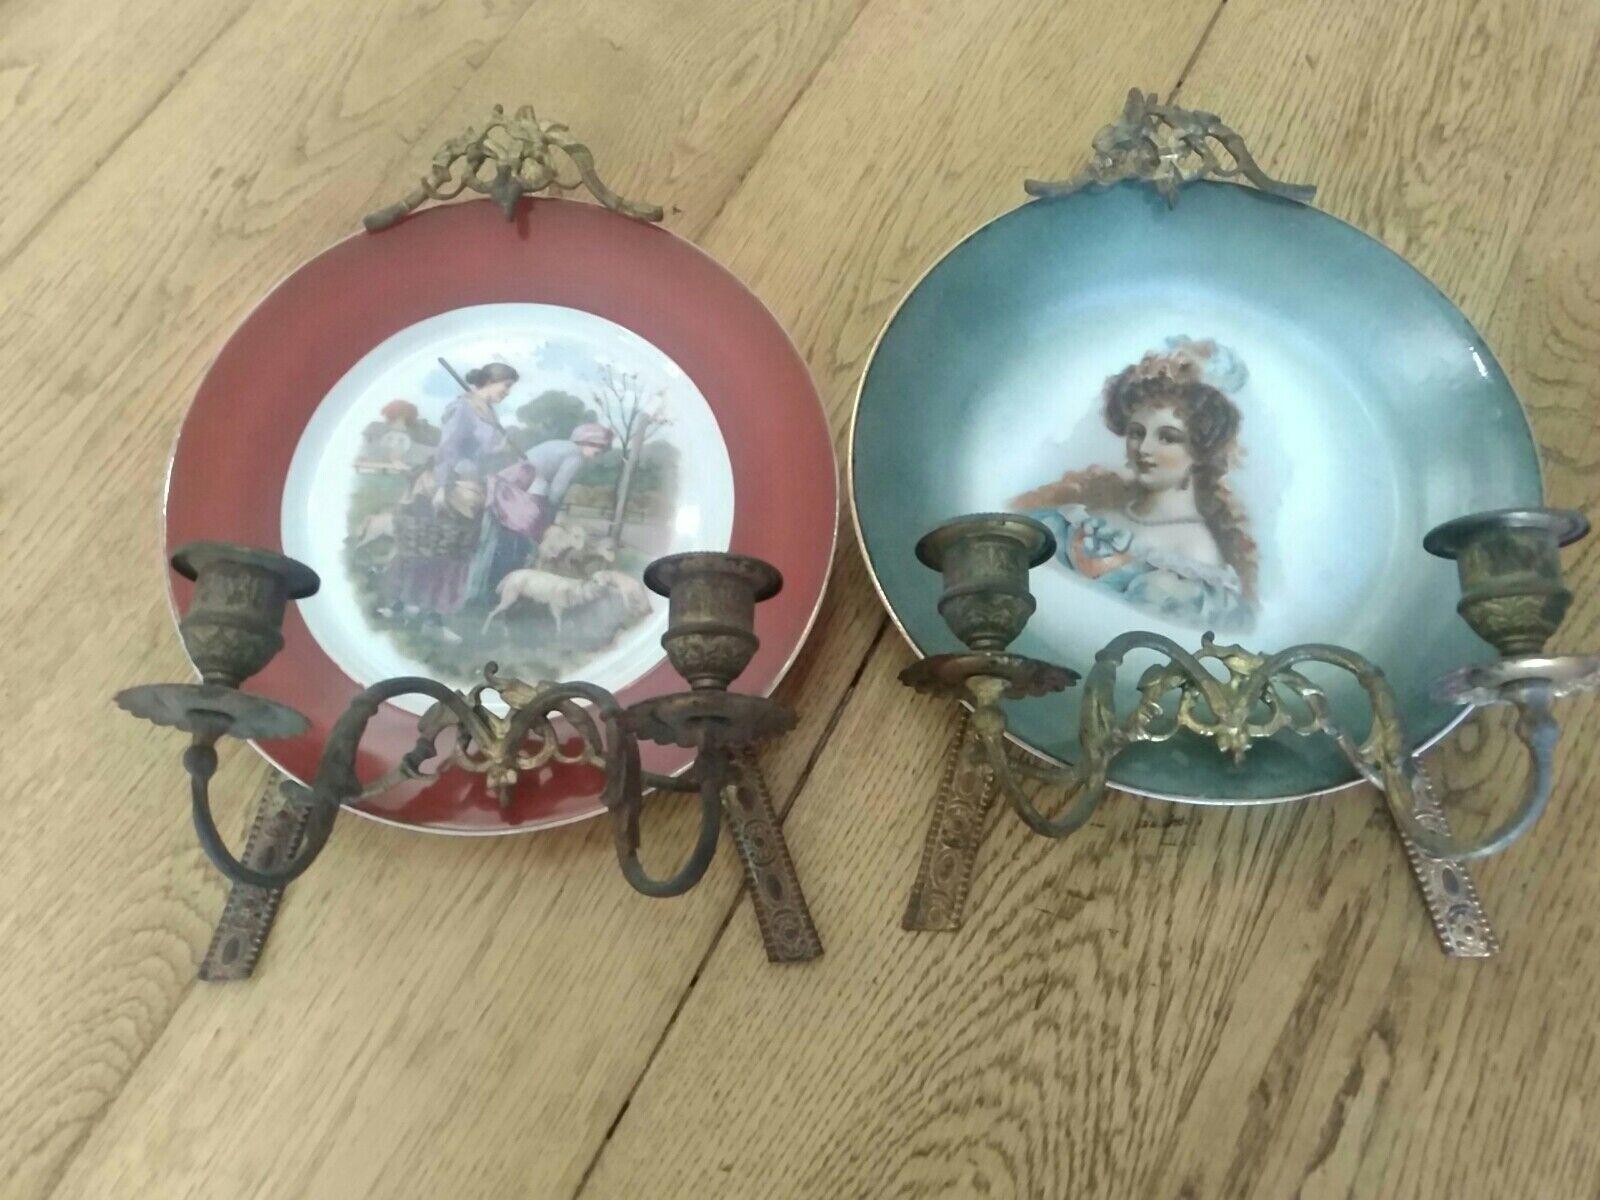 c1800 Pair French Louis XVI style Gilt Bronze Frames with Art on Porcelain Plates.Original unelectrified state. I do not know if the art is hand painted or not. Shows beautifully.